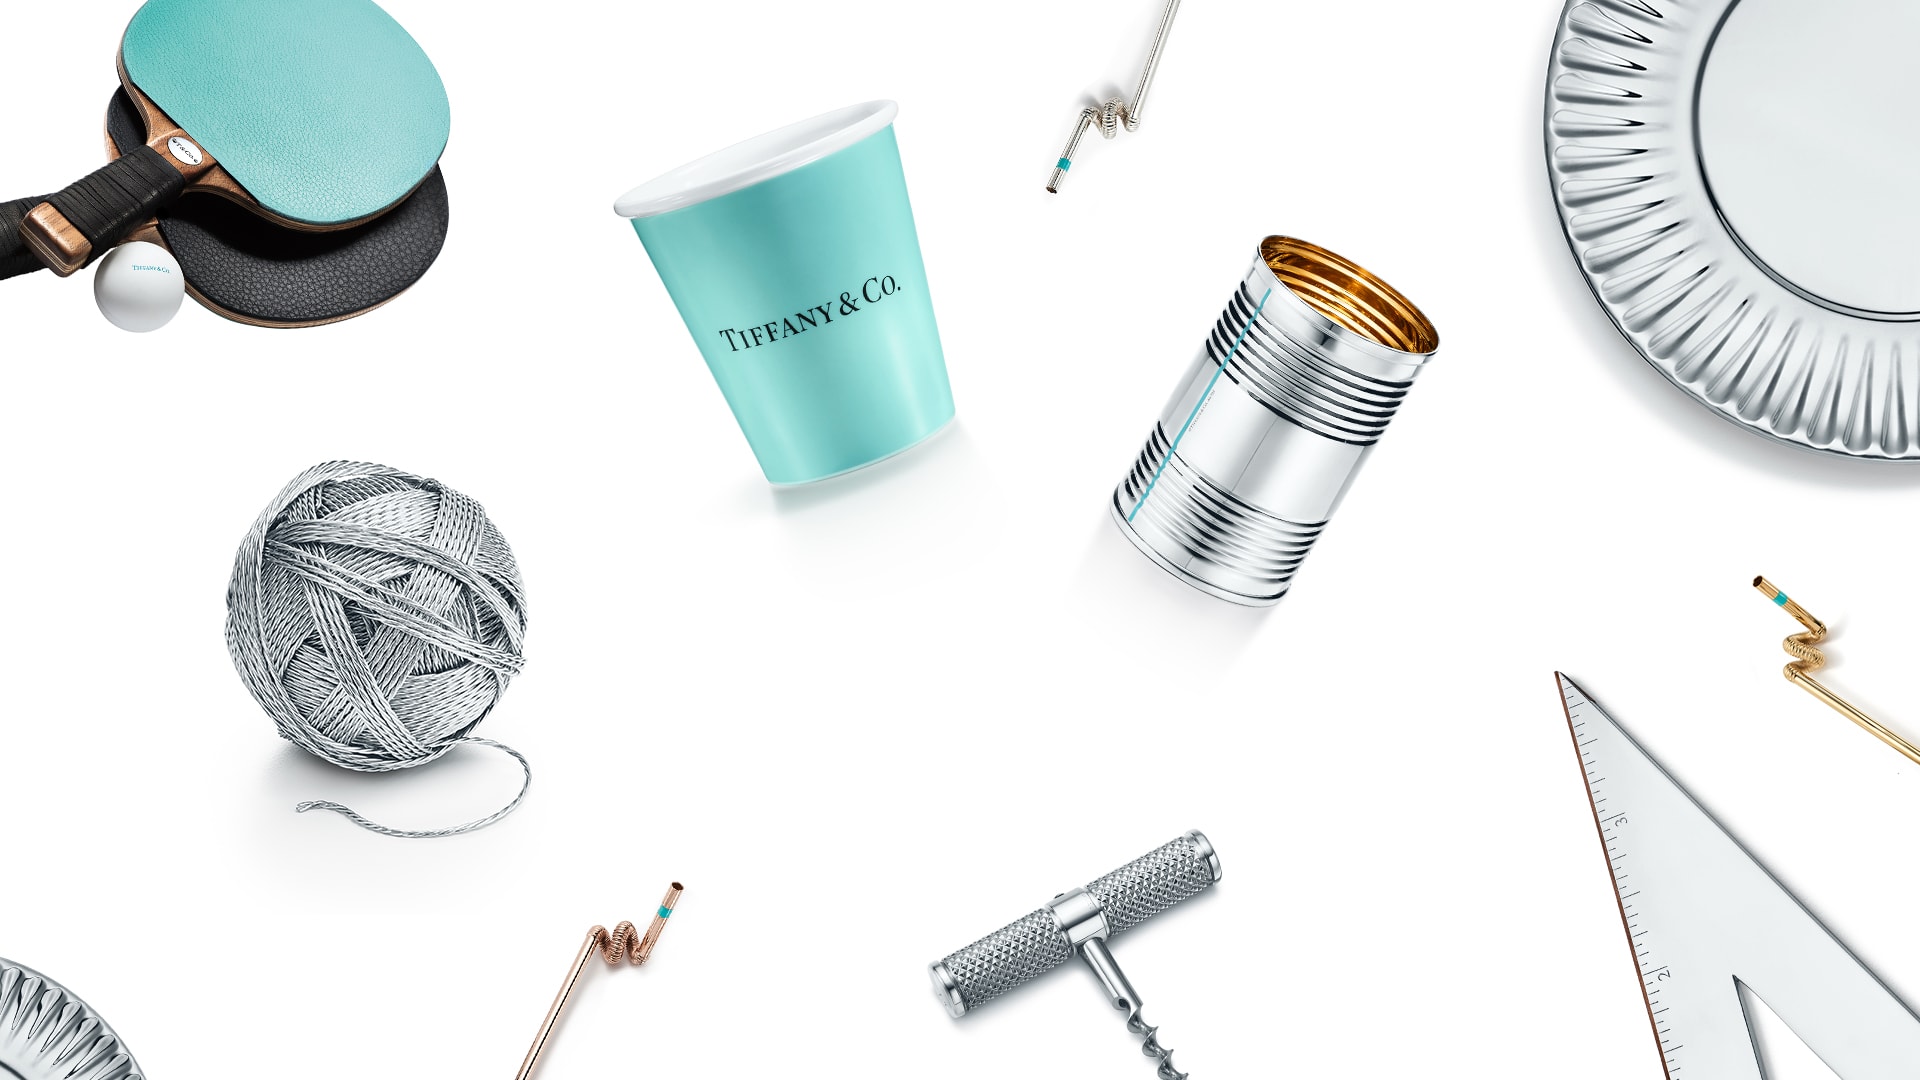 Do You Need A $1,650 Tin Can From Tiffany & Co?